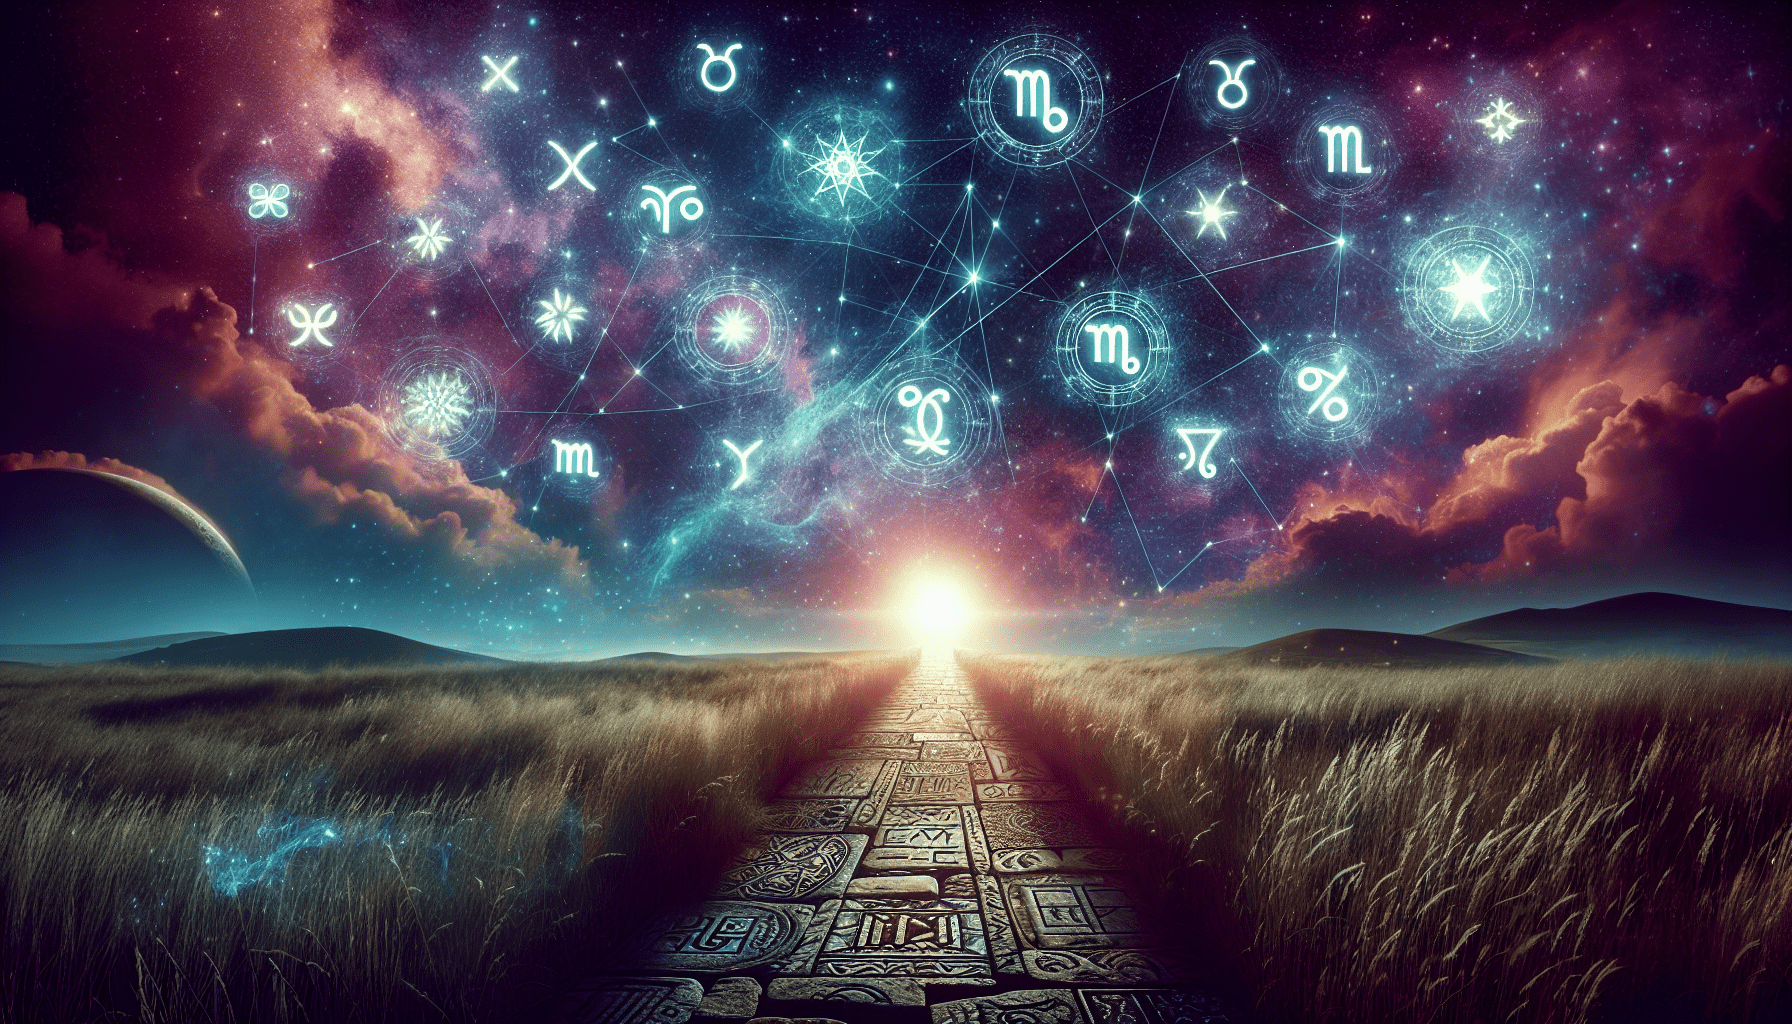 How Do You Find Your Birth Sign?